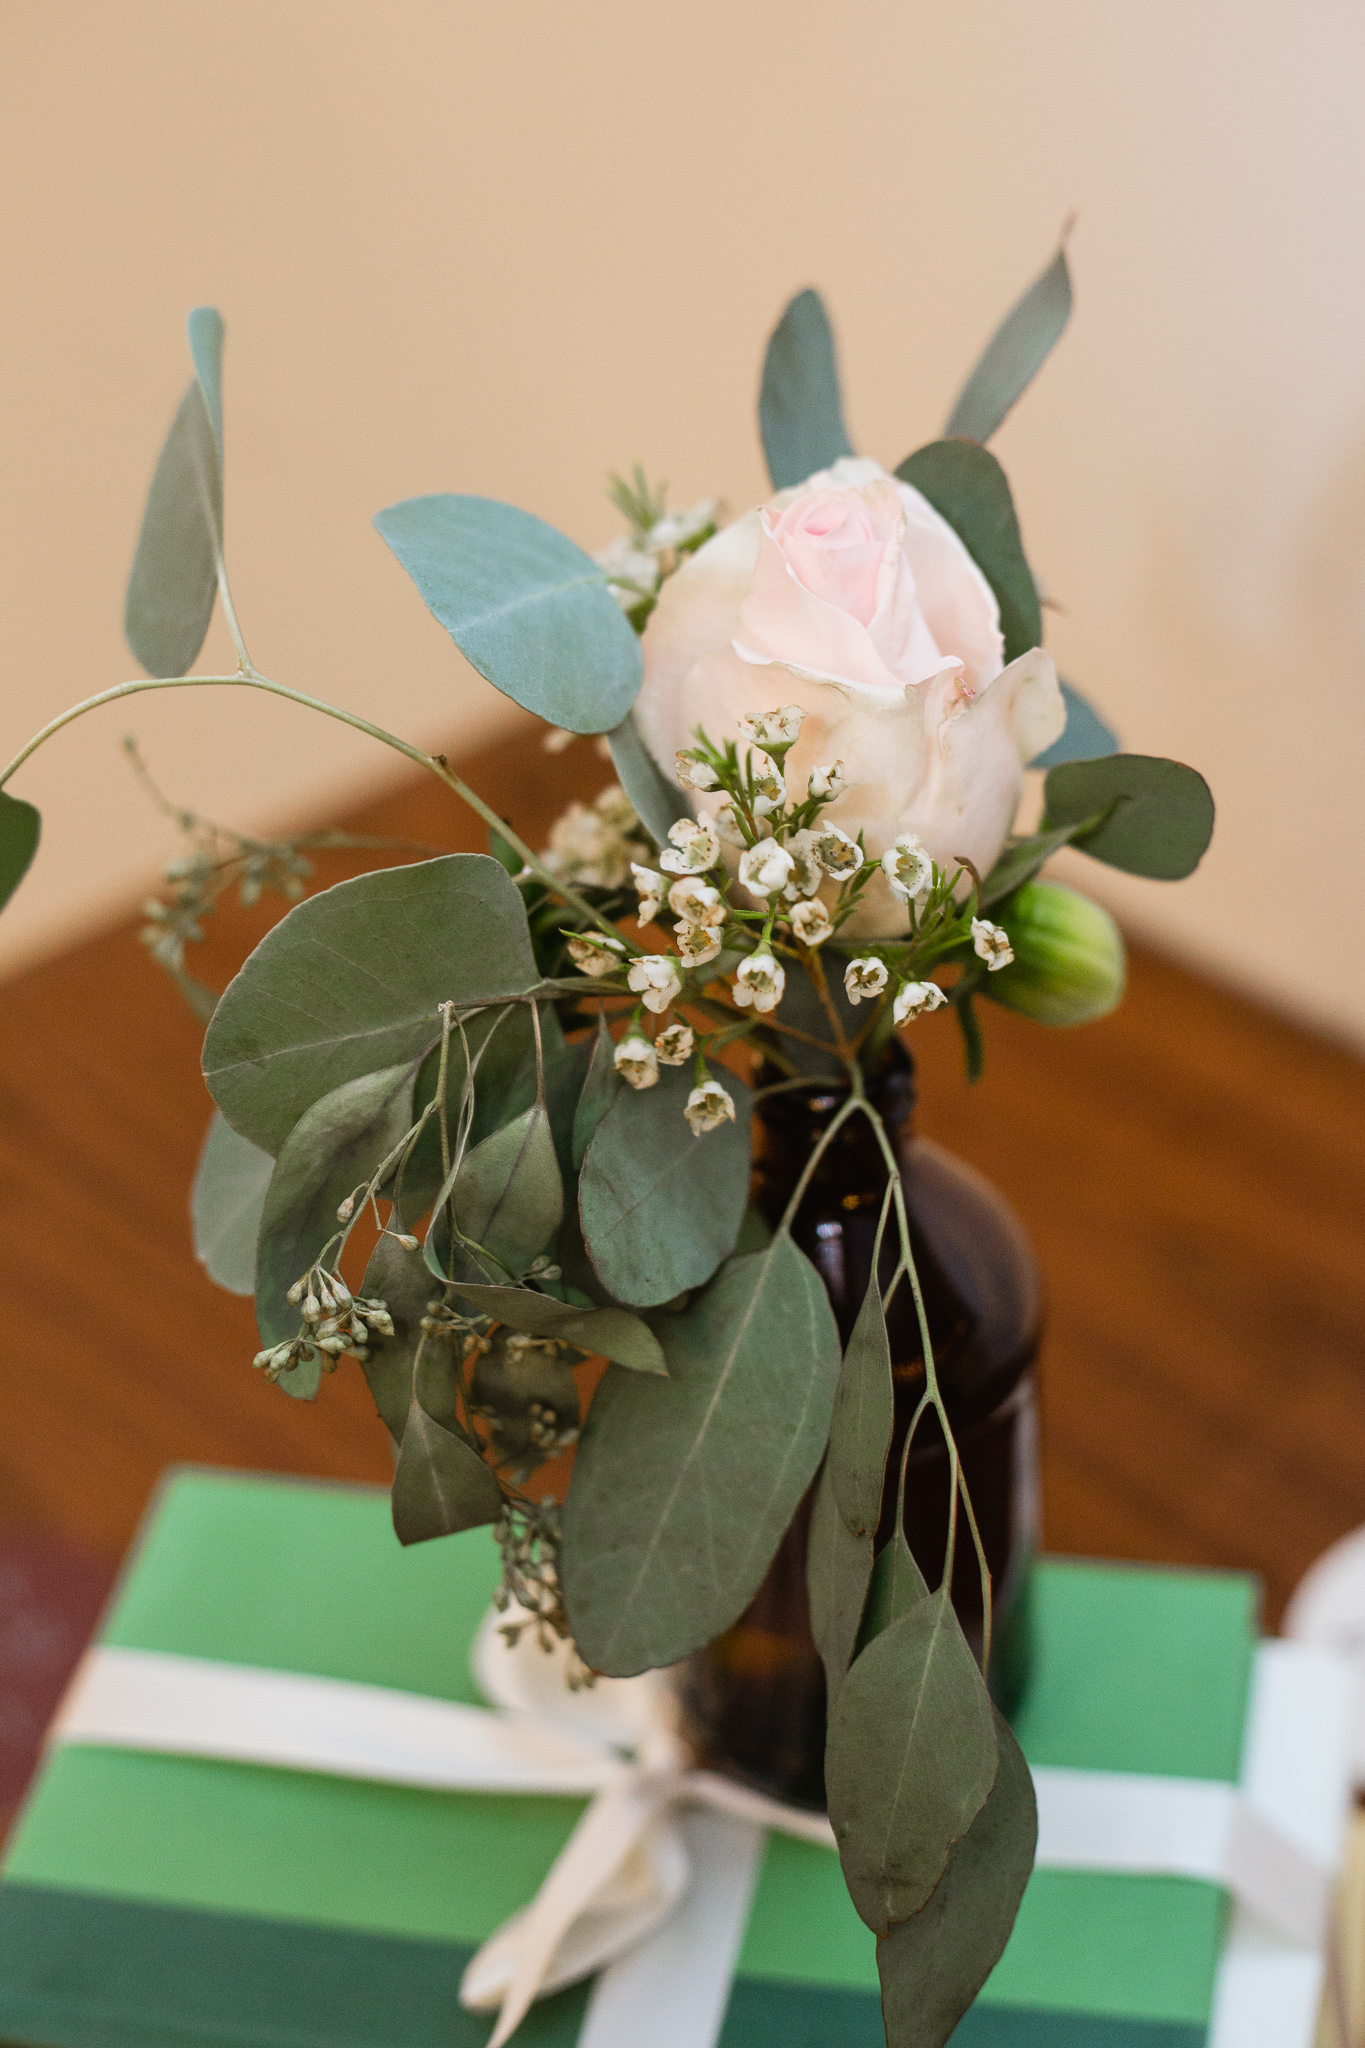 Vintage bottle with eucalyptus and rose and waxflower and vintage books centerpieces at an urban wedding reception.